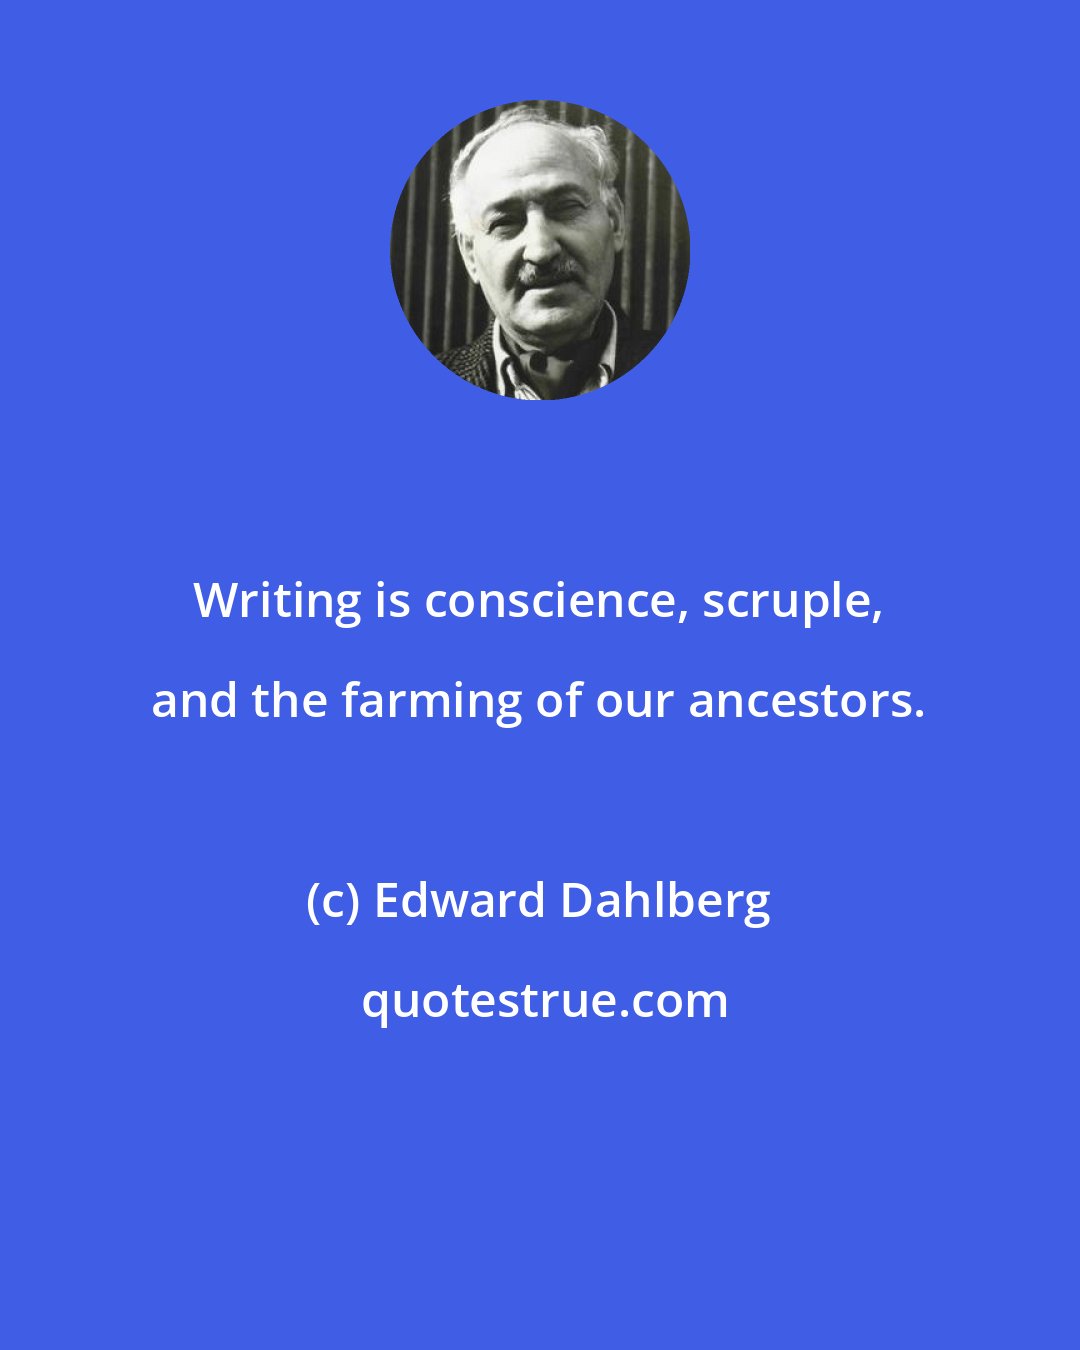 Edward Dahlberg: Writing is conscience, scruple, and the farming of our ancestors.